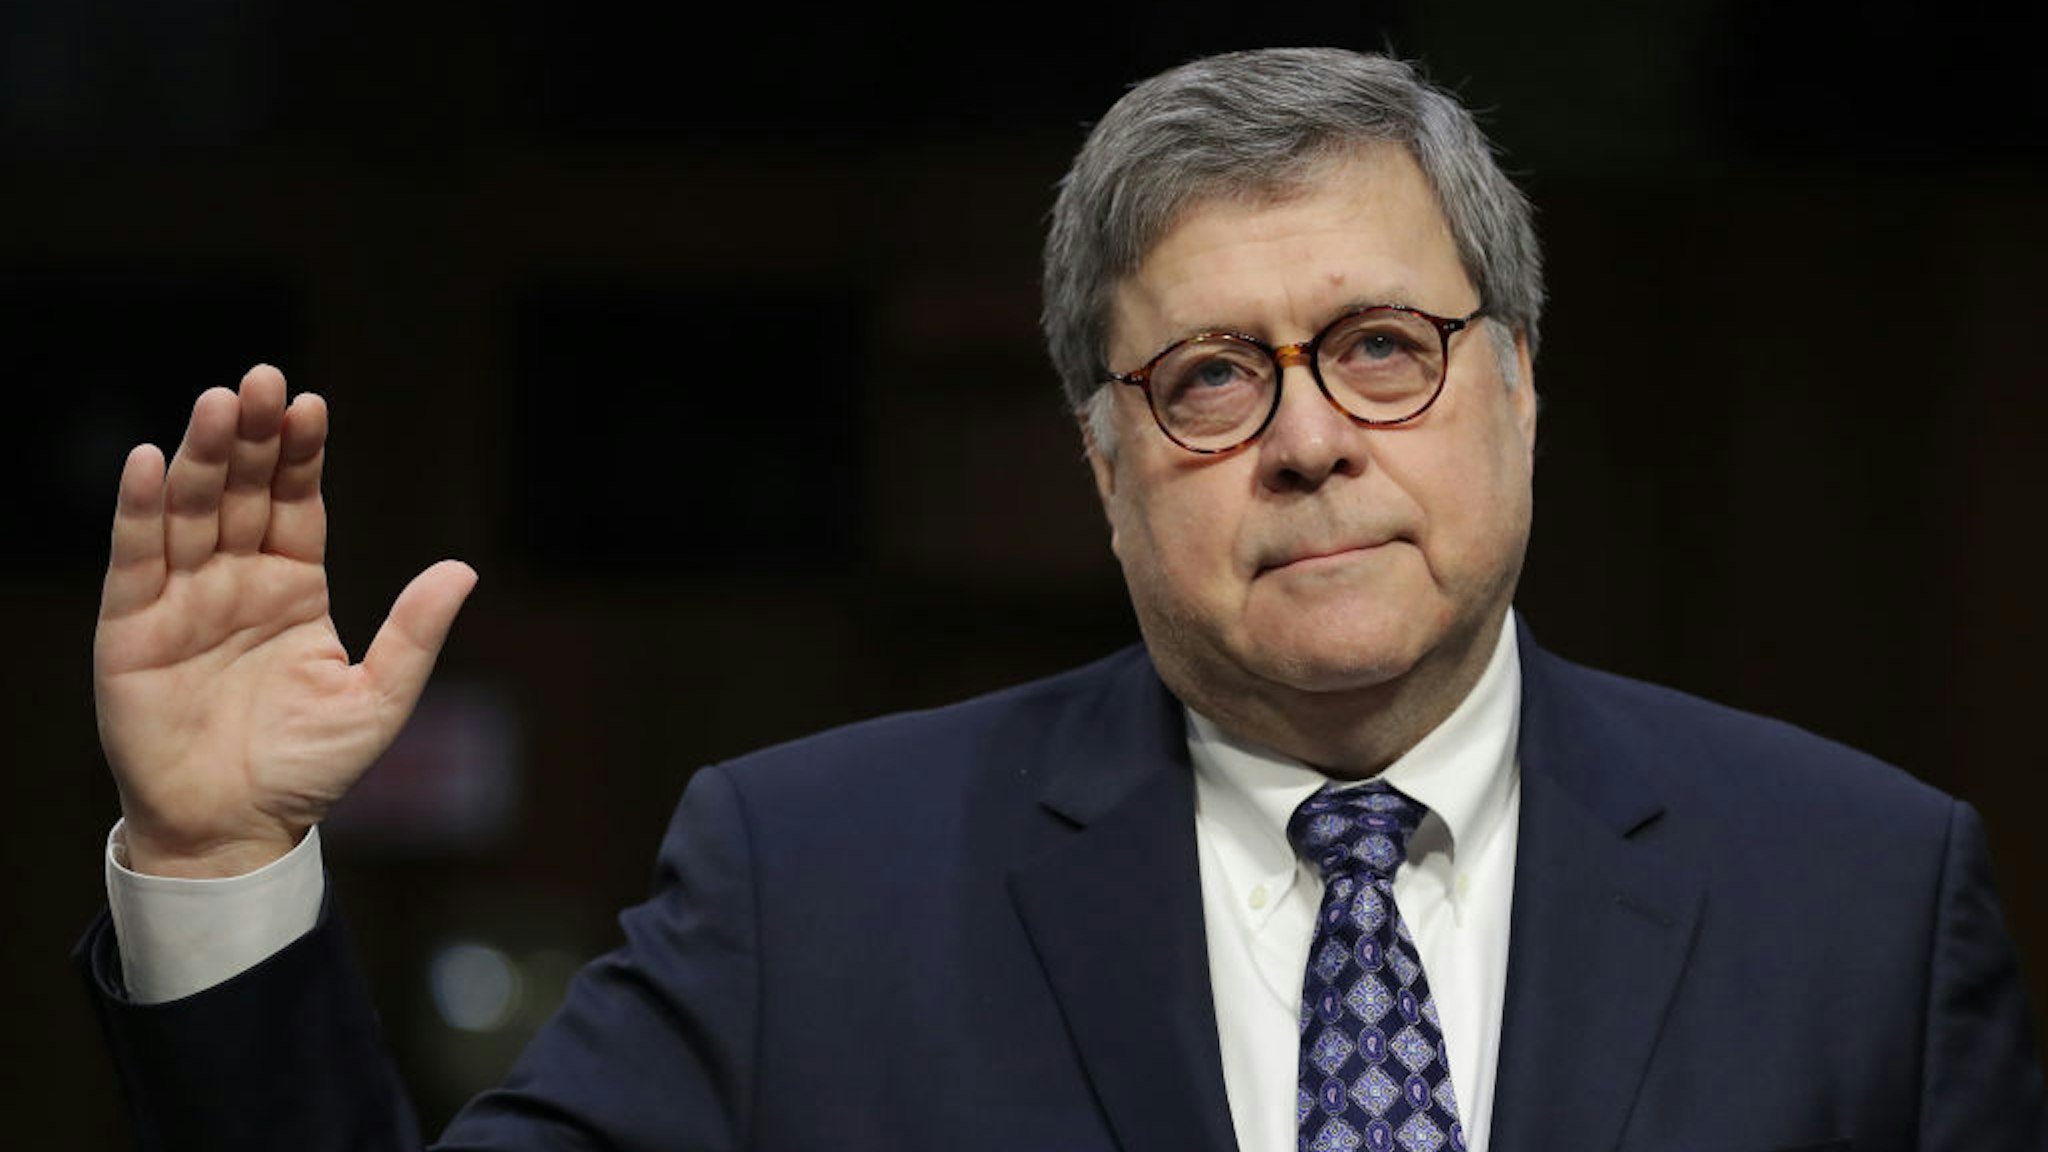 WASHINGTON, DC - JANUARY 15: U.S. Attorney General nominee William Barr (C) is sworn in prior to testifying at his confirmation hearing before the Senate Judiciary Committee January 15, 2019 in Washington, DC. Barr, who previously served as Attorney General under President George H. W. Bush, is expected to be confronted about his views on the investigation being conducted by special counsel Robert Mueller. (Photo by Chip Somodevilla/Getty Images)